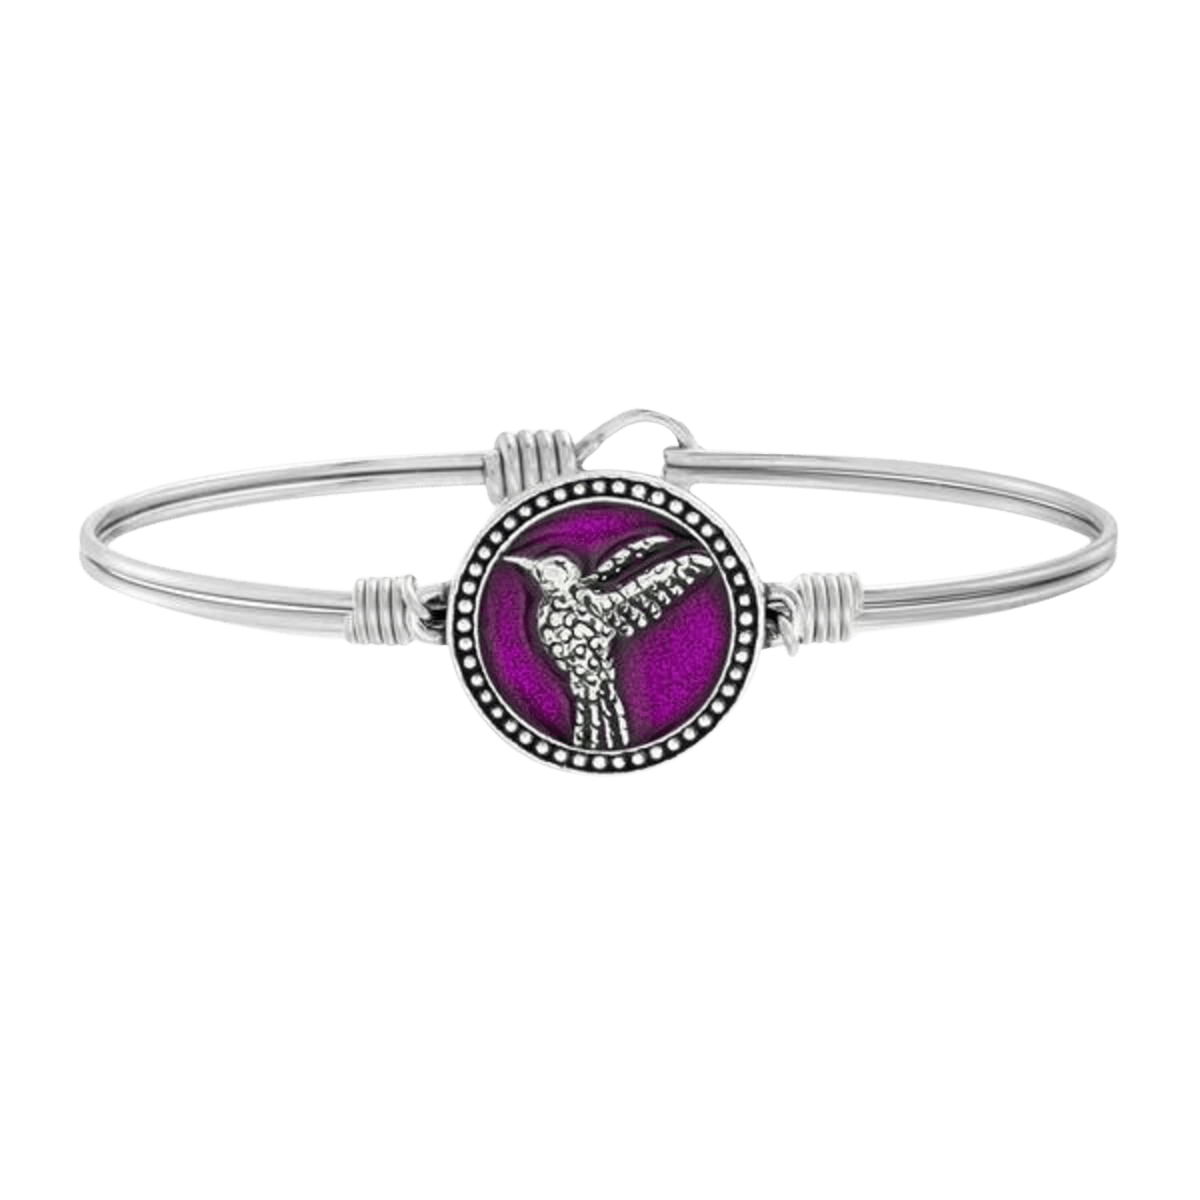 Luca + Danni Hummingbird Bangle (available in blue and purple) - Silver Parrot, Inc. 